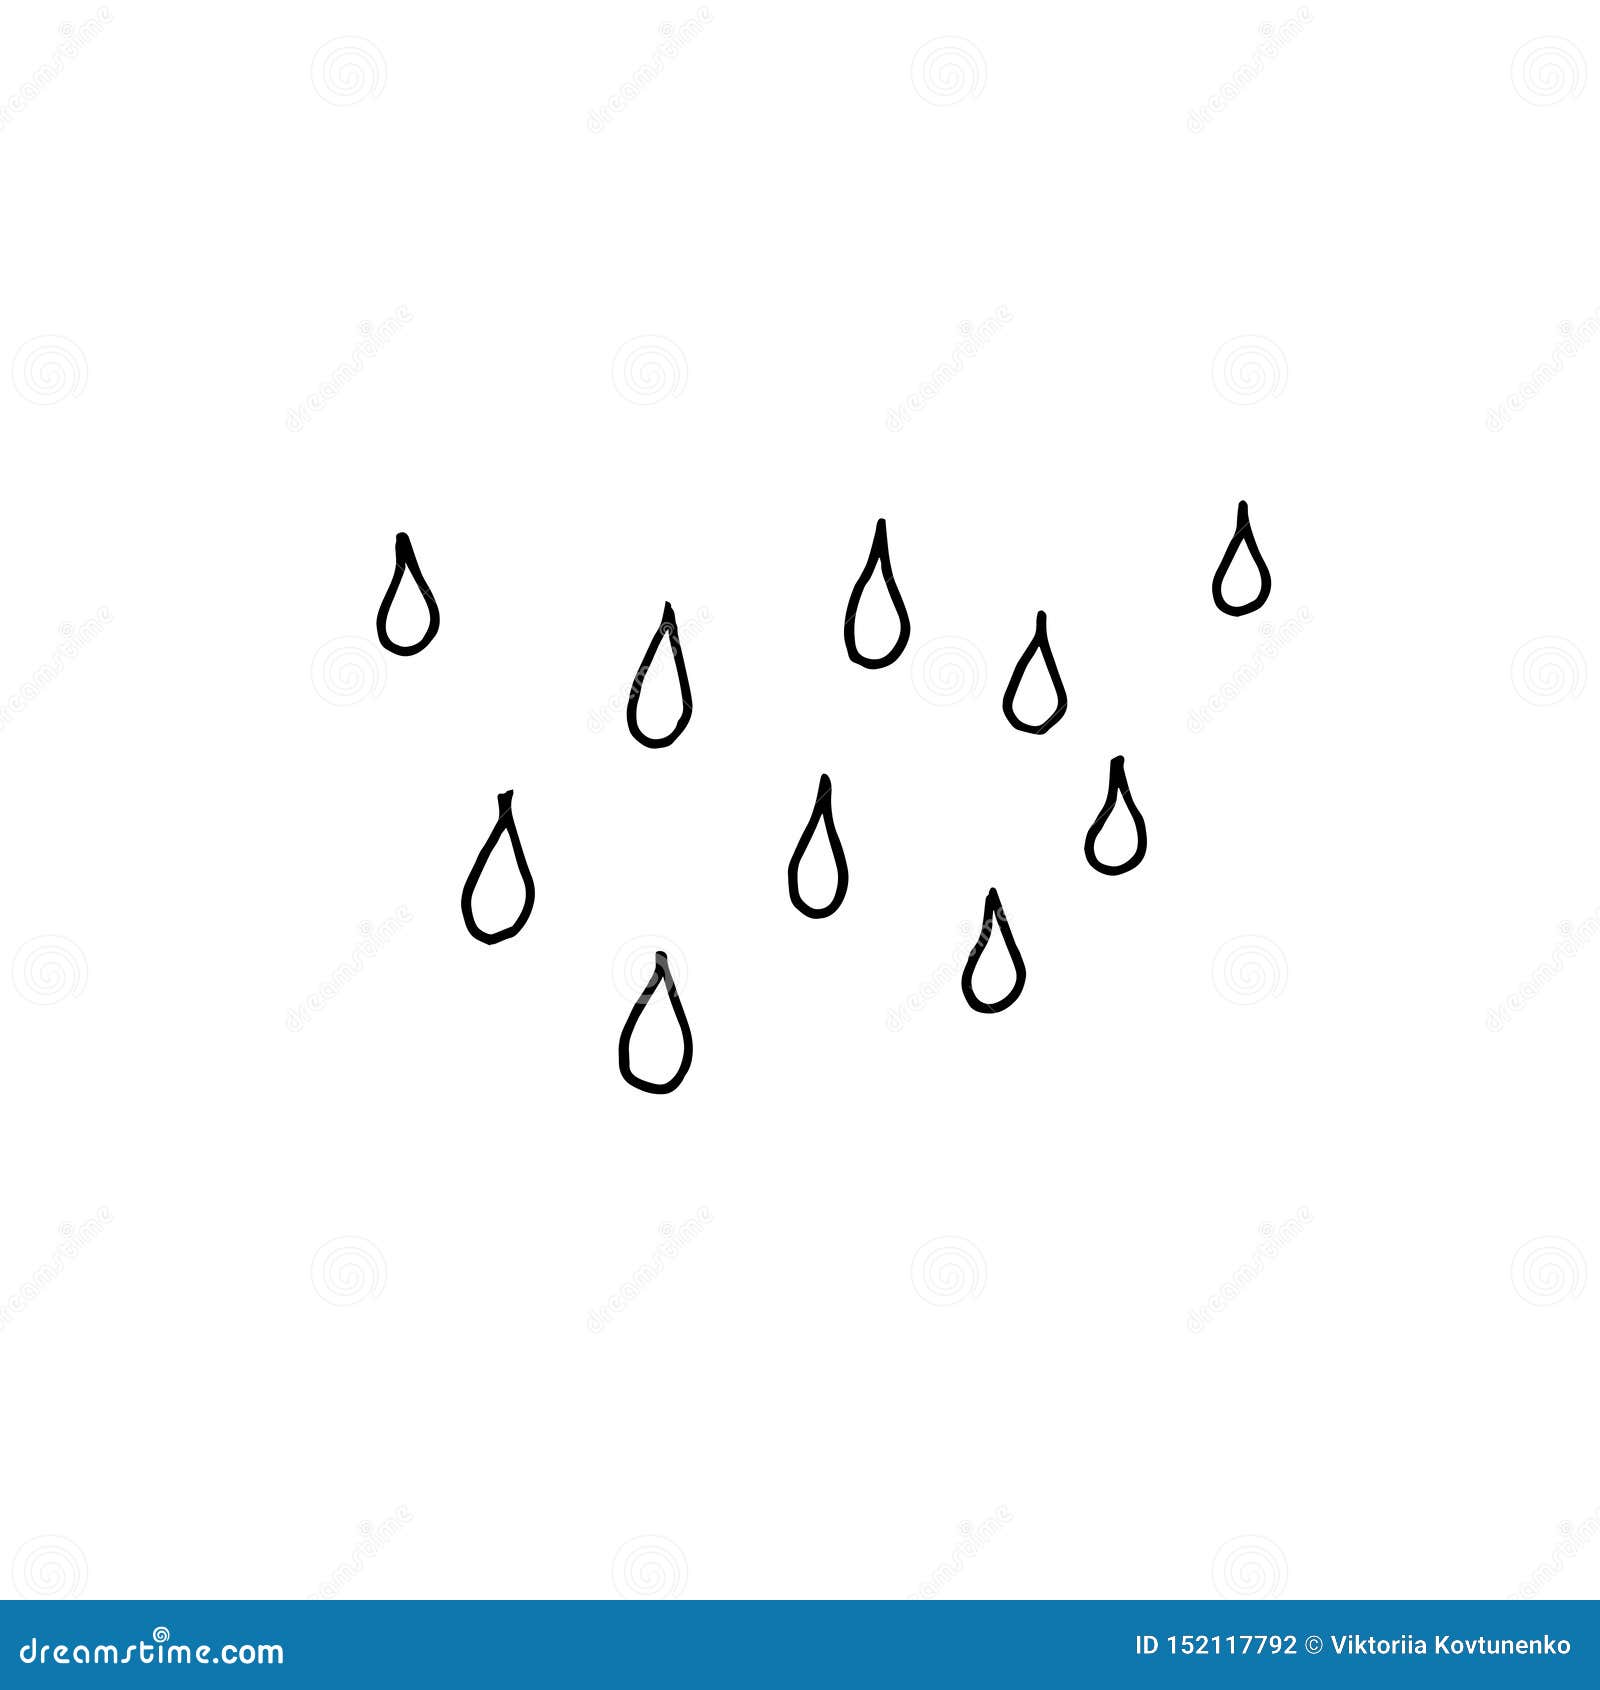 Cute Raindrop Coloring Page With A Face Outline Sketch Drawing Vector, Raindrops  Drawing, Raindrops Outline, Raindrops Sketch PNG and Vector with  Transparent Background for Free Download